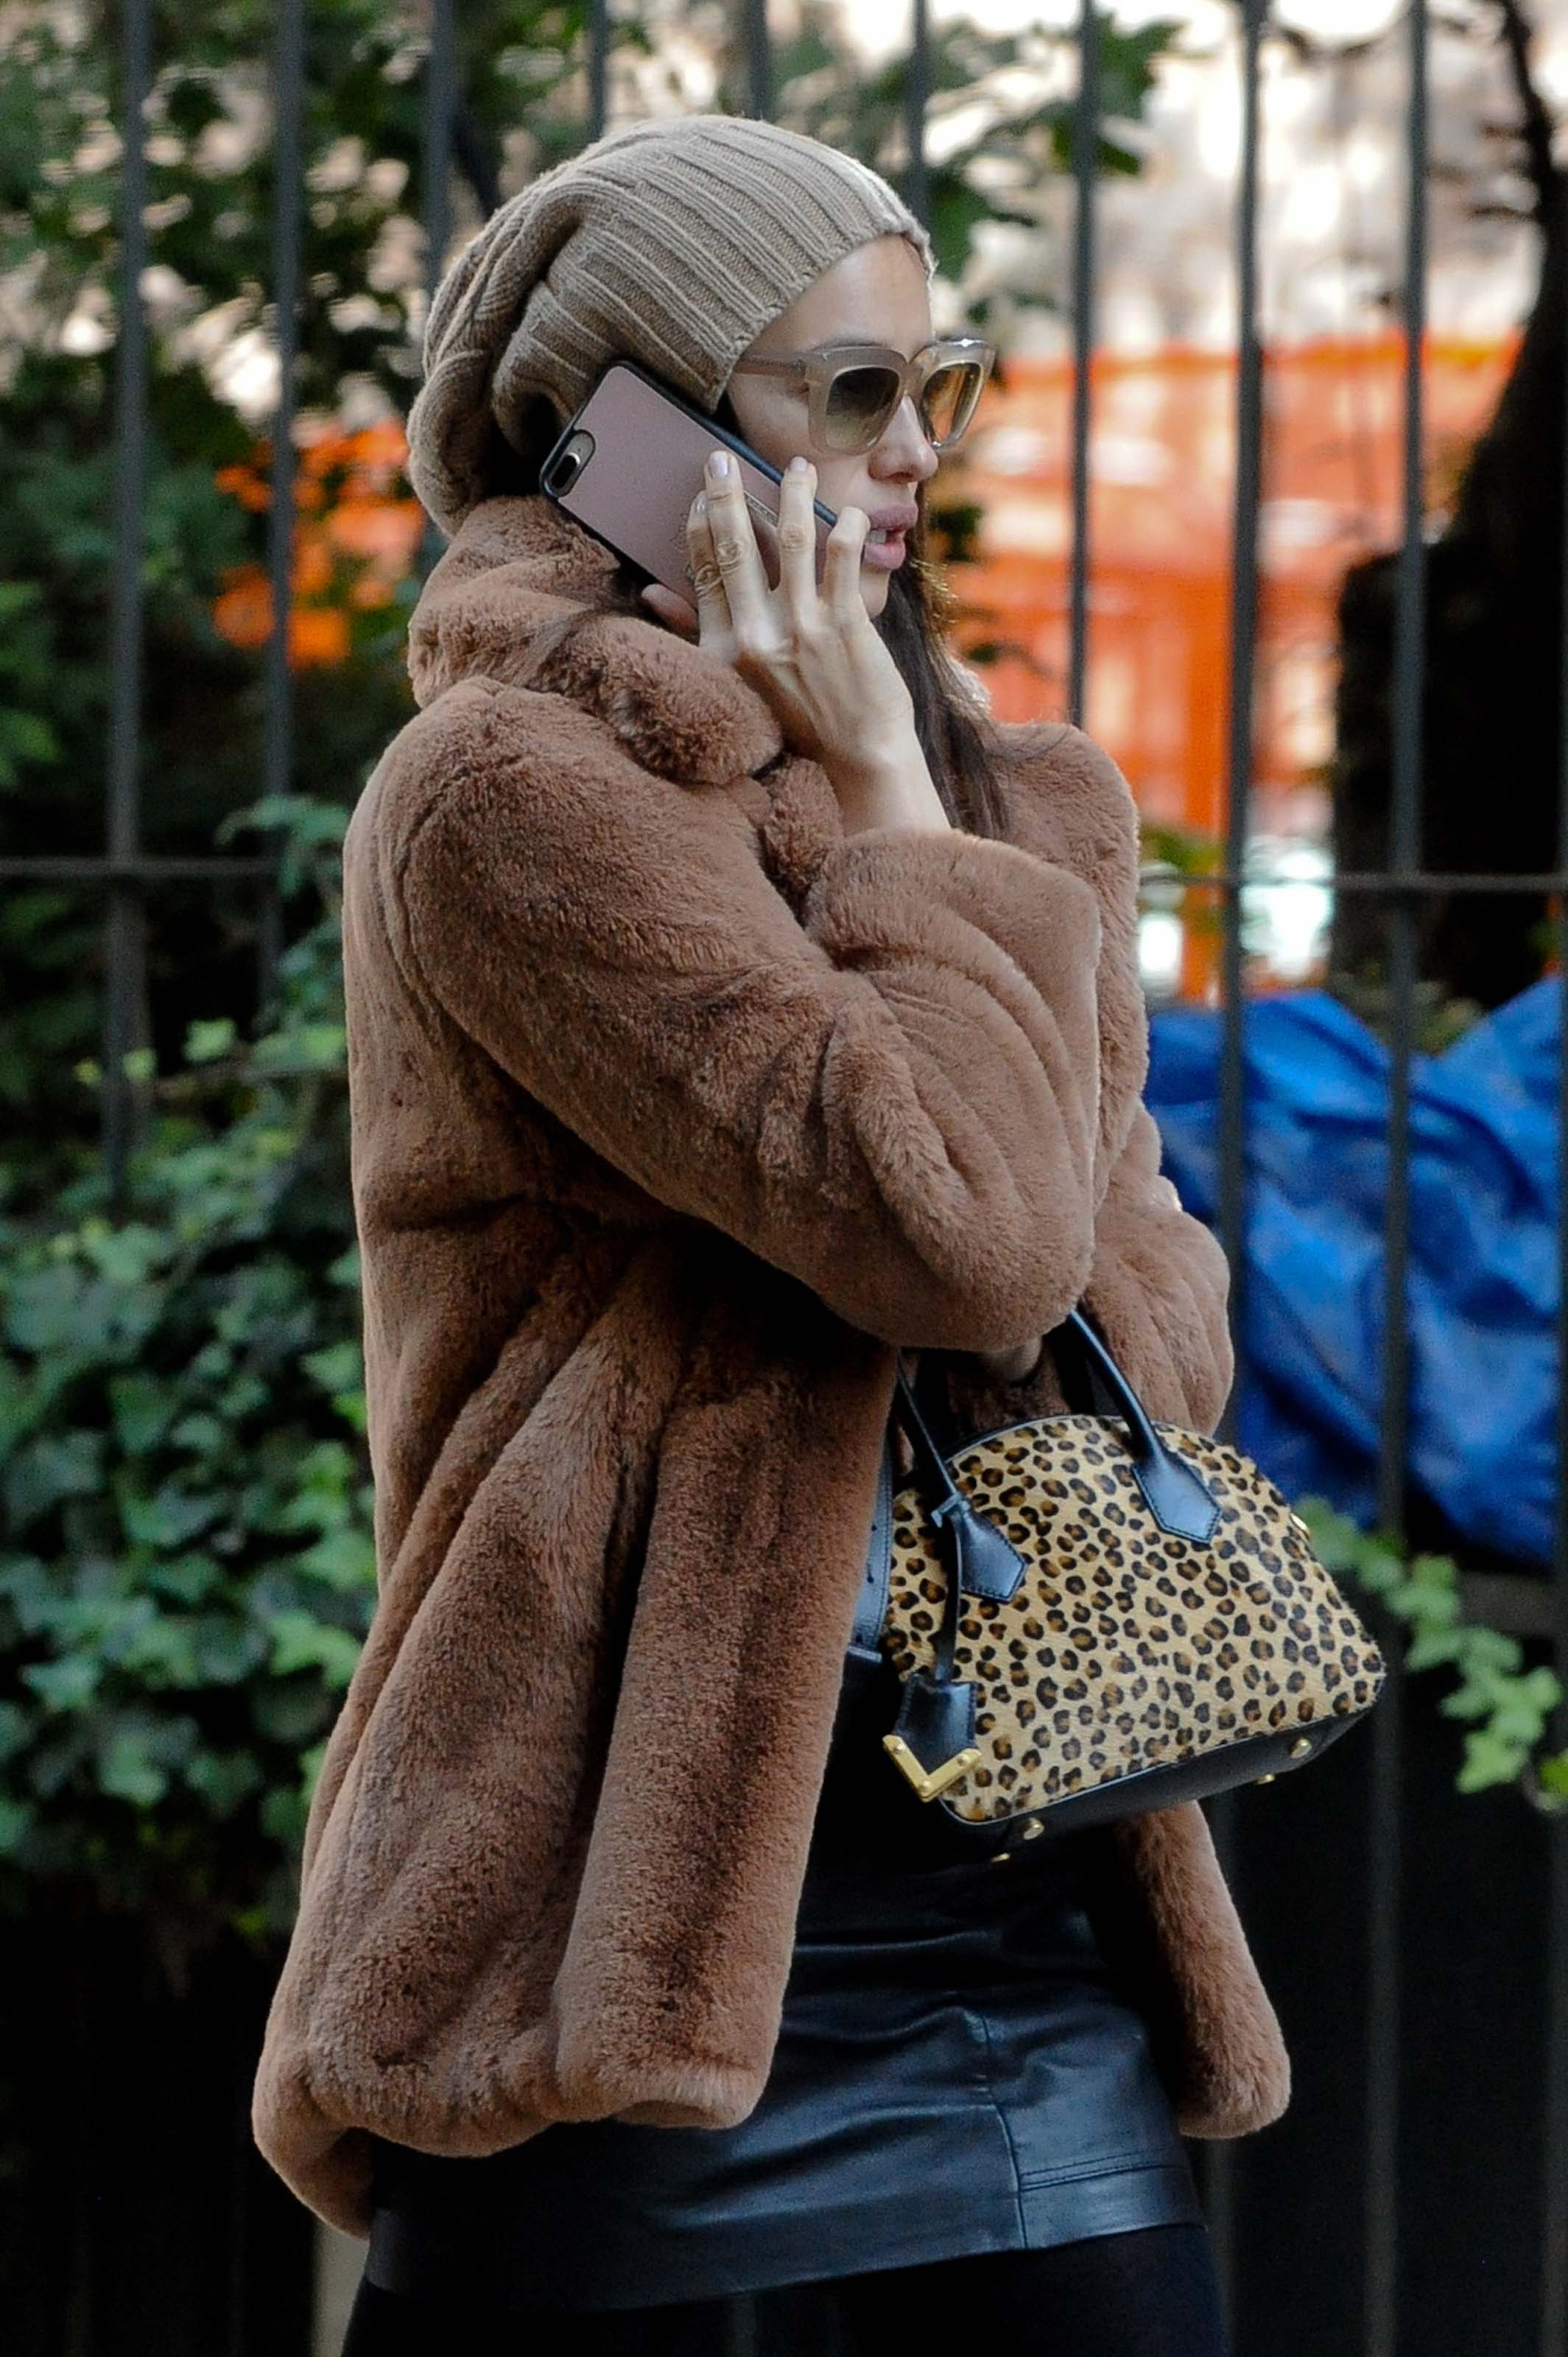 Irina Shayk out and about in NYC